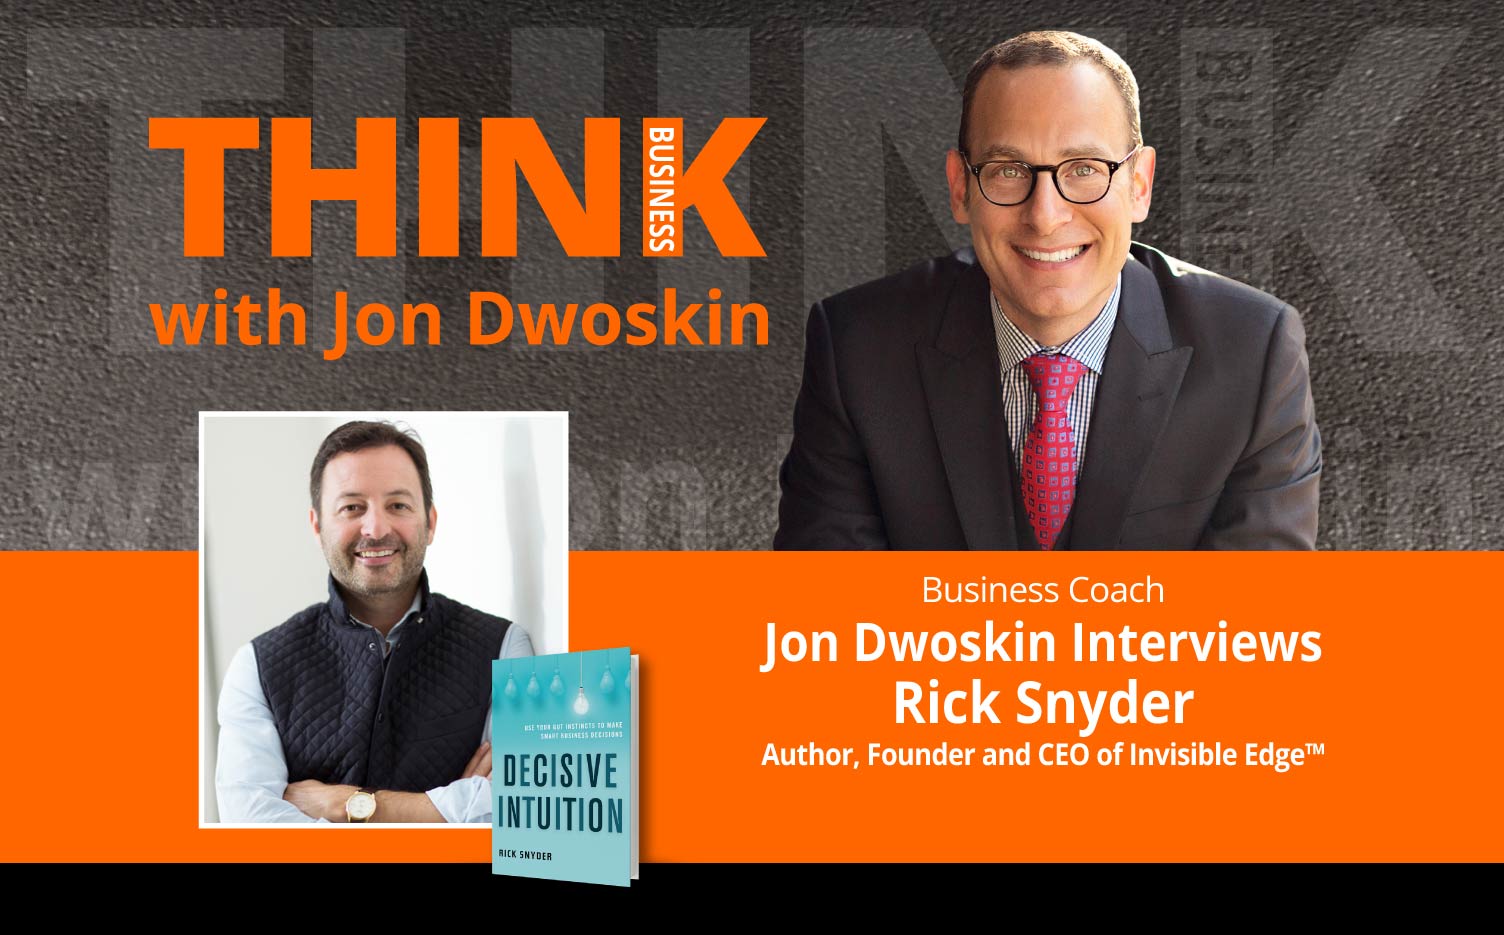 THINK Business Podcast: Jon Dwoskin Interviews Rick Snyder, Author, Founder and CEO of Invisible Edge™